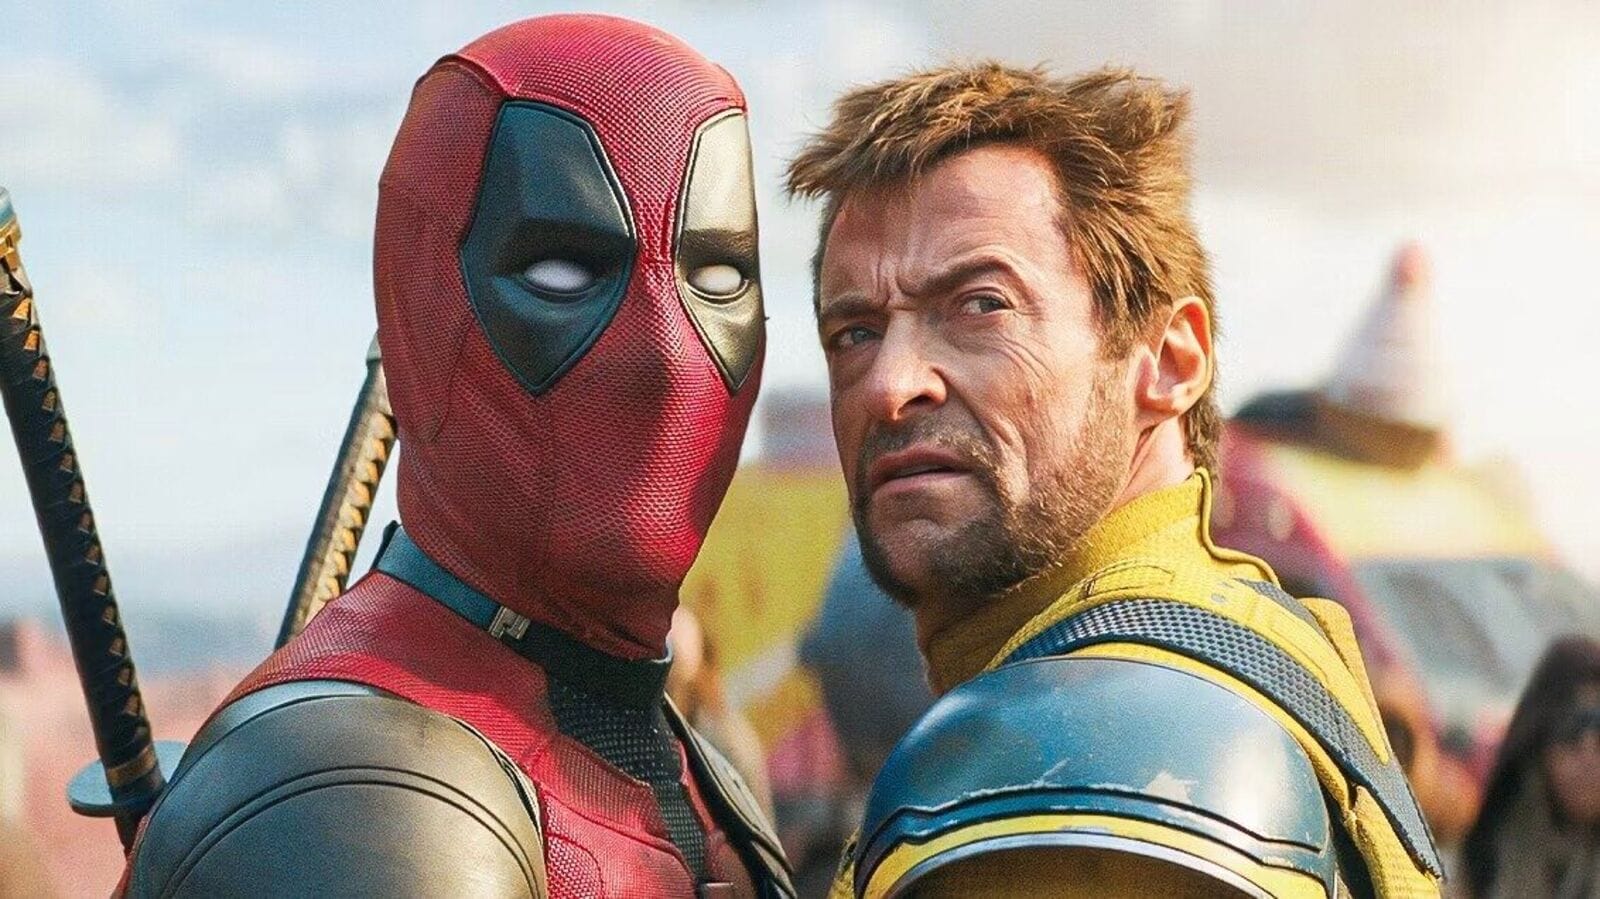 What to watch this week: Deadpool & Wolverine, Time Bandits